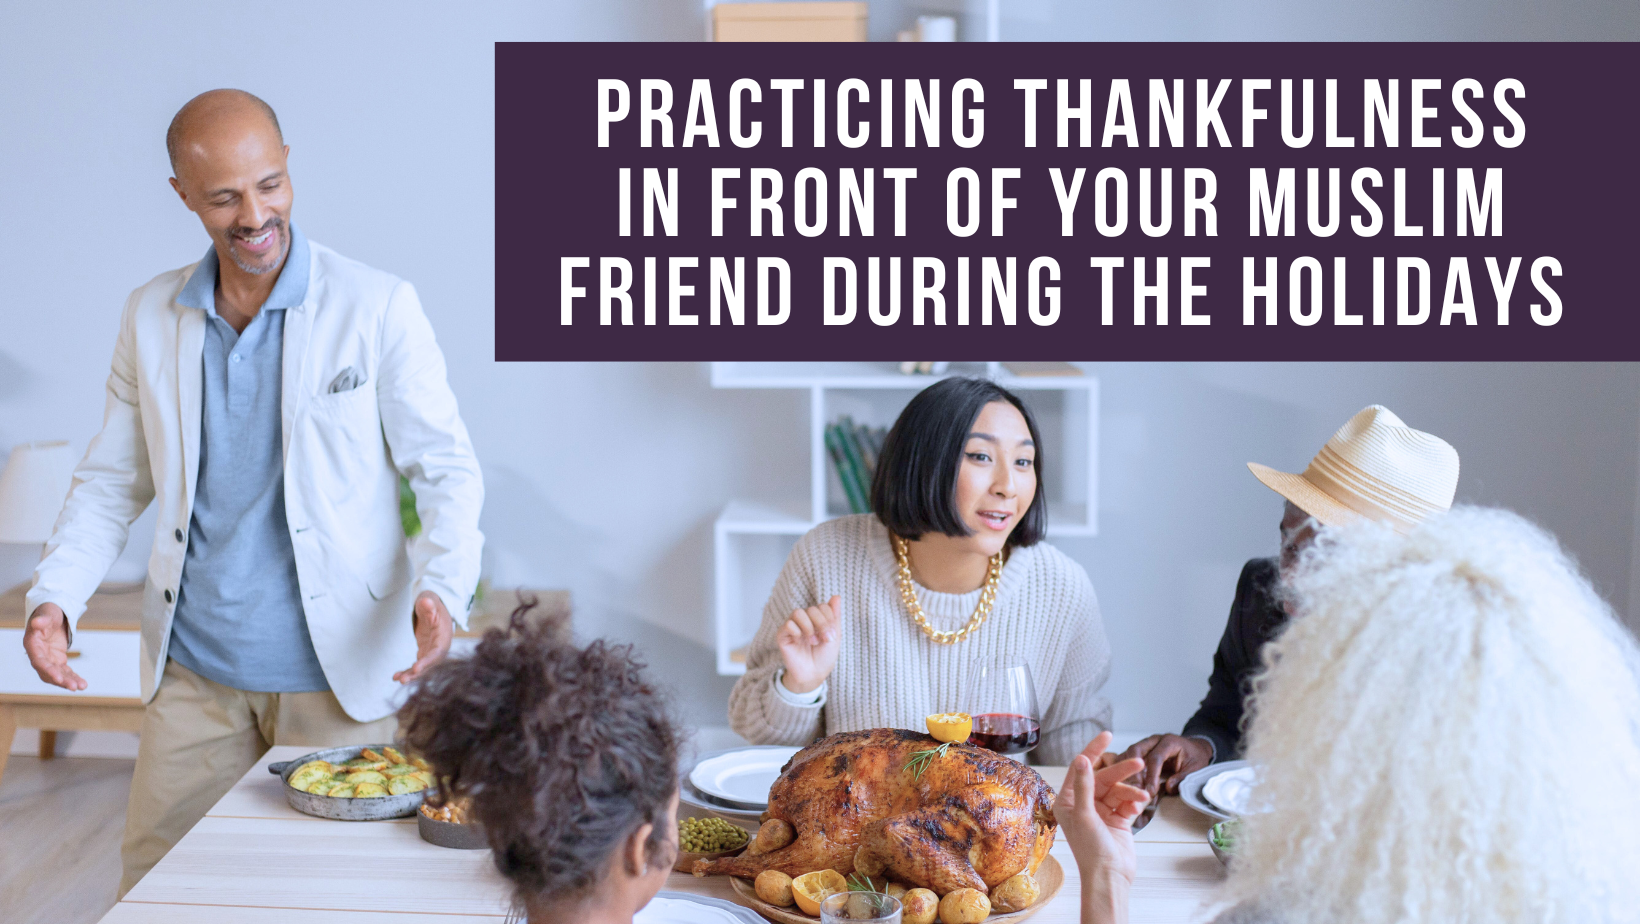 Practicing thankfulness in front of your Muslim friend during the holidays